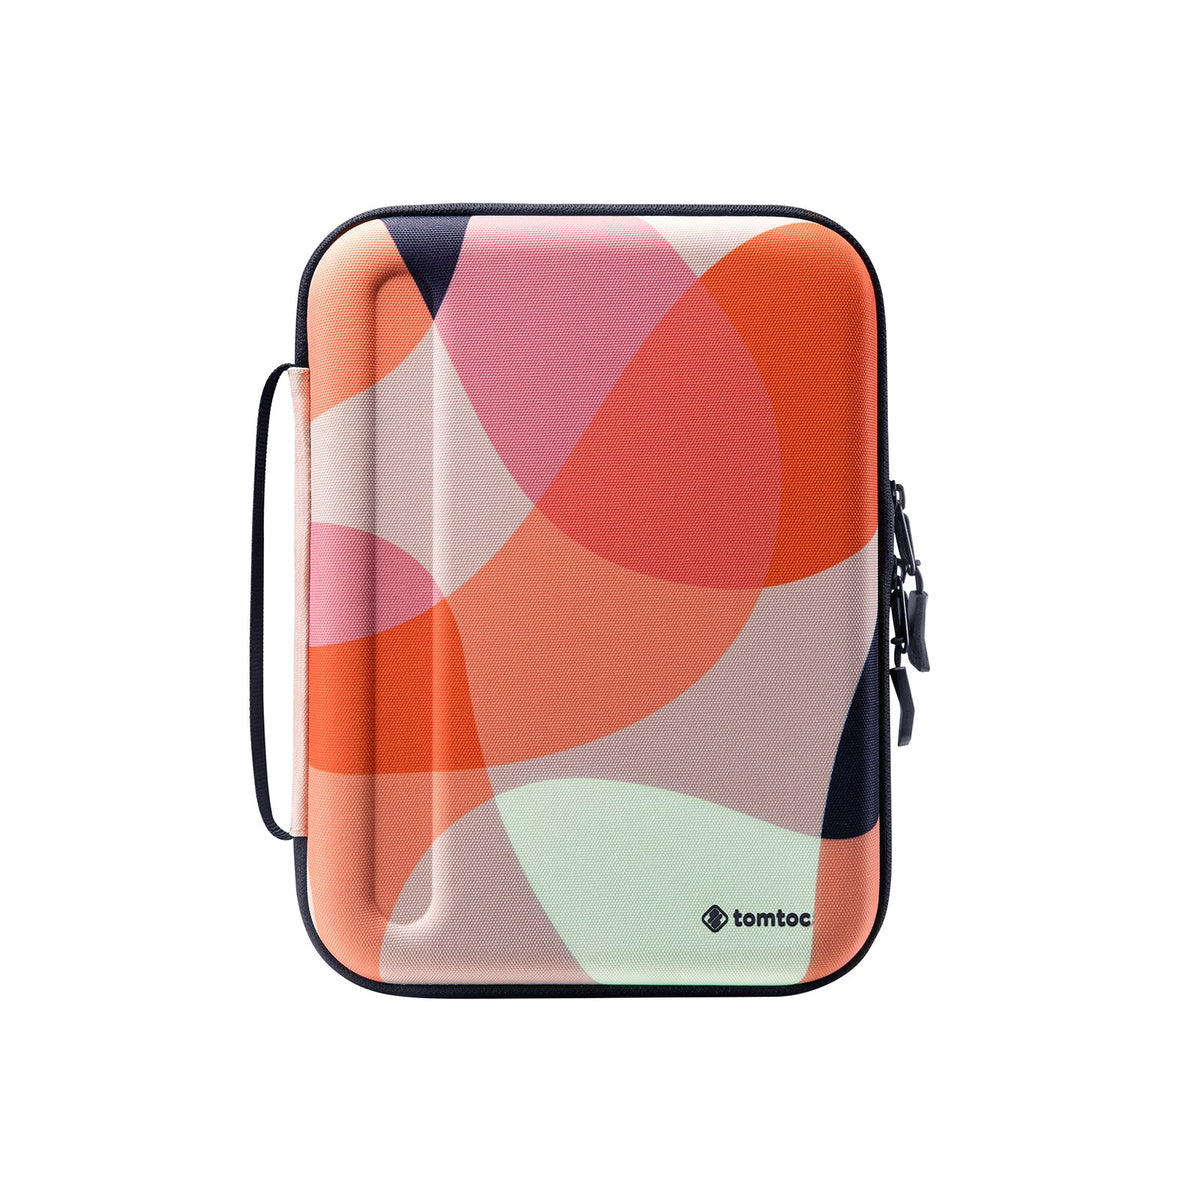 Tomtoc | Laptop Sleeves & Ipad Covers | Tomtoc